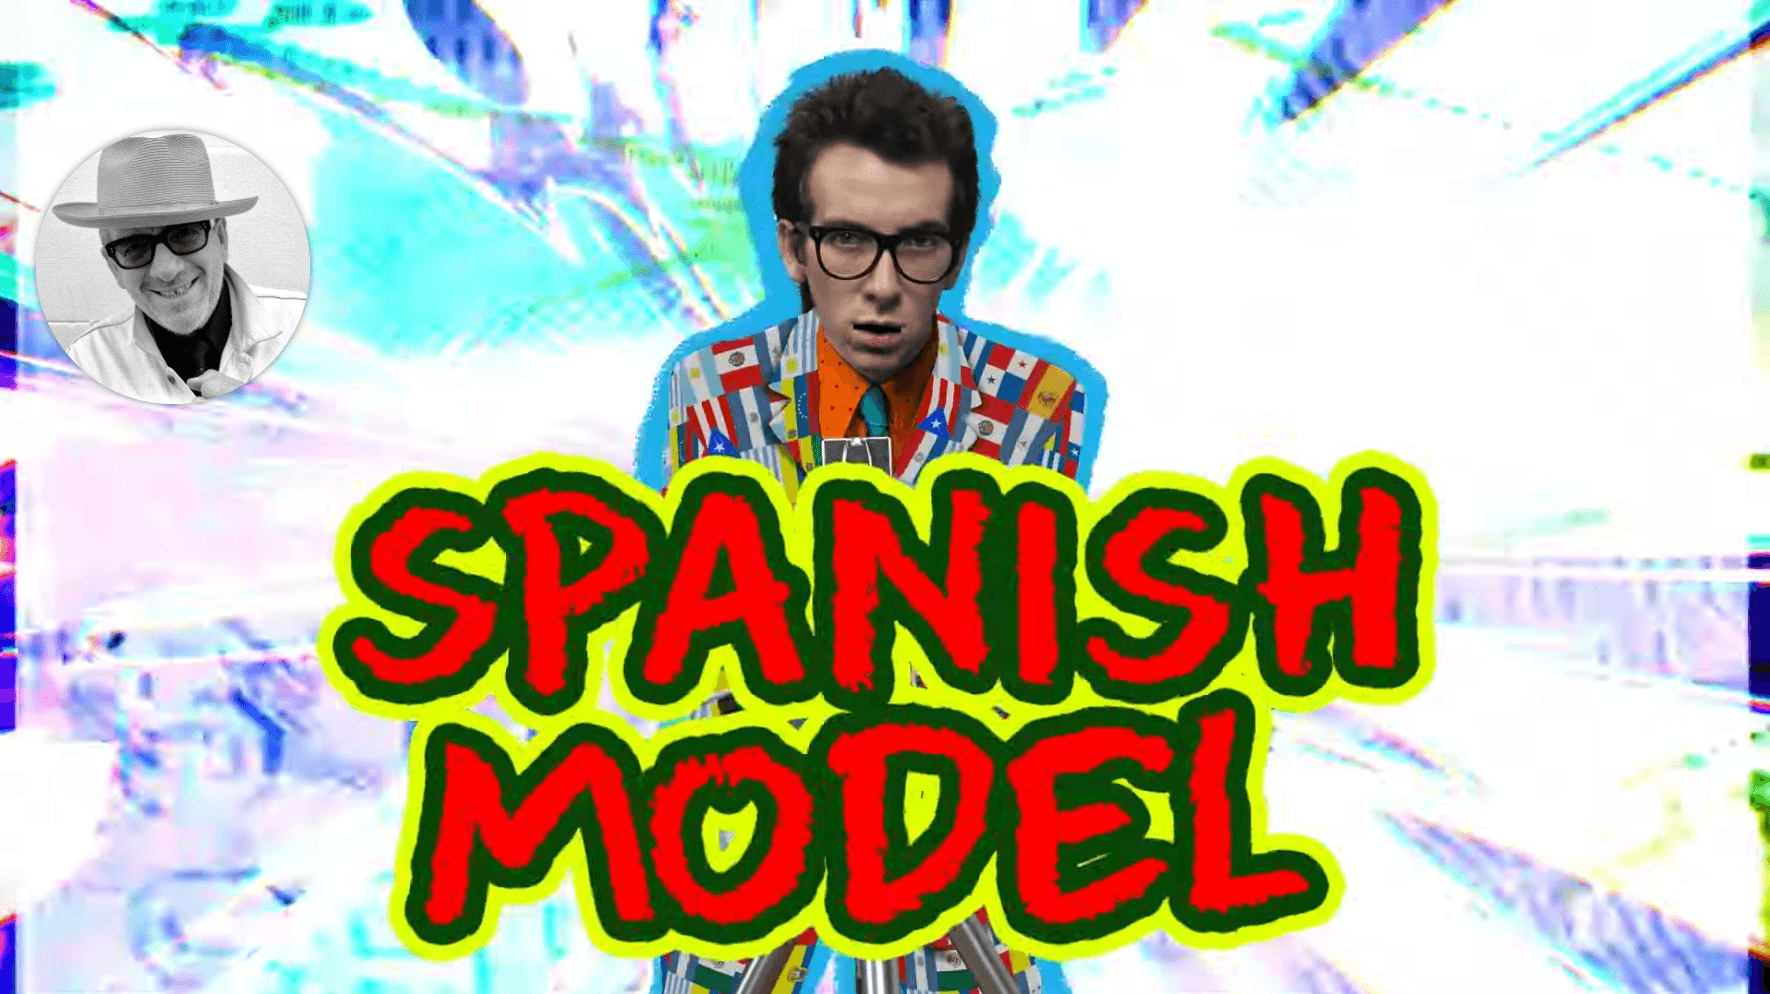 A screenshoot of a YouTube video announcing Elvis Costello's new album "Spanish Model."